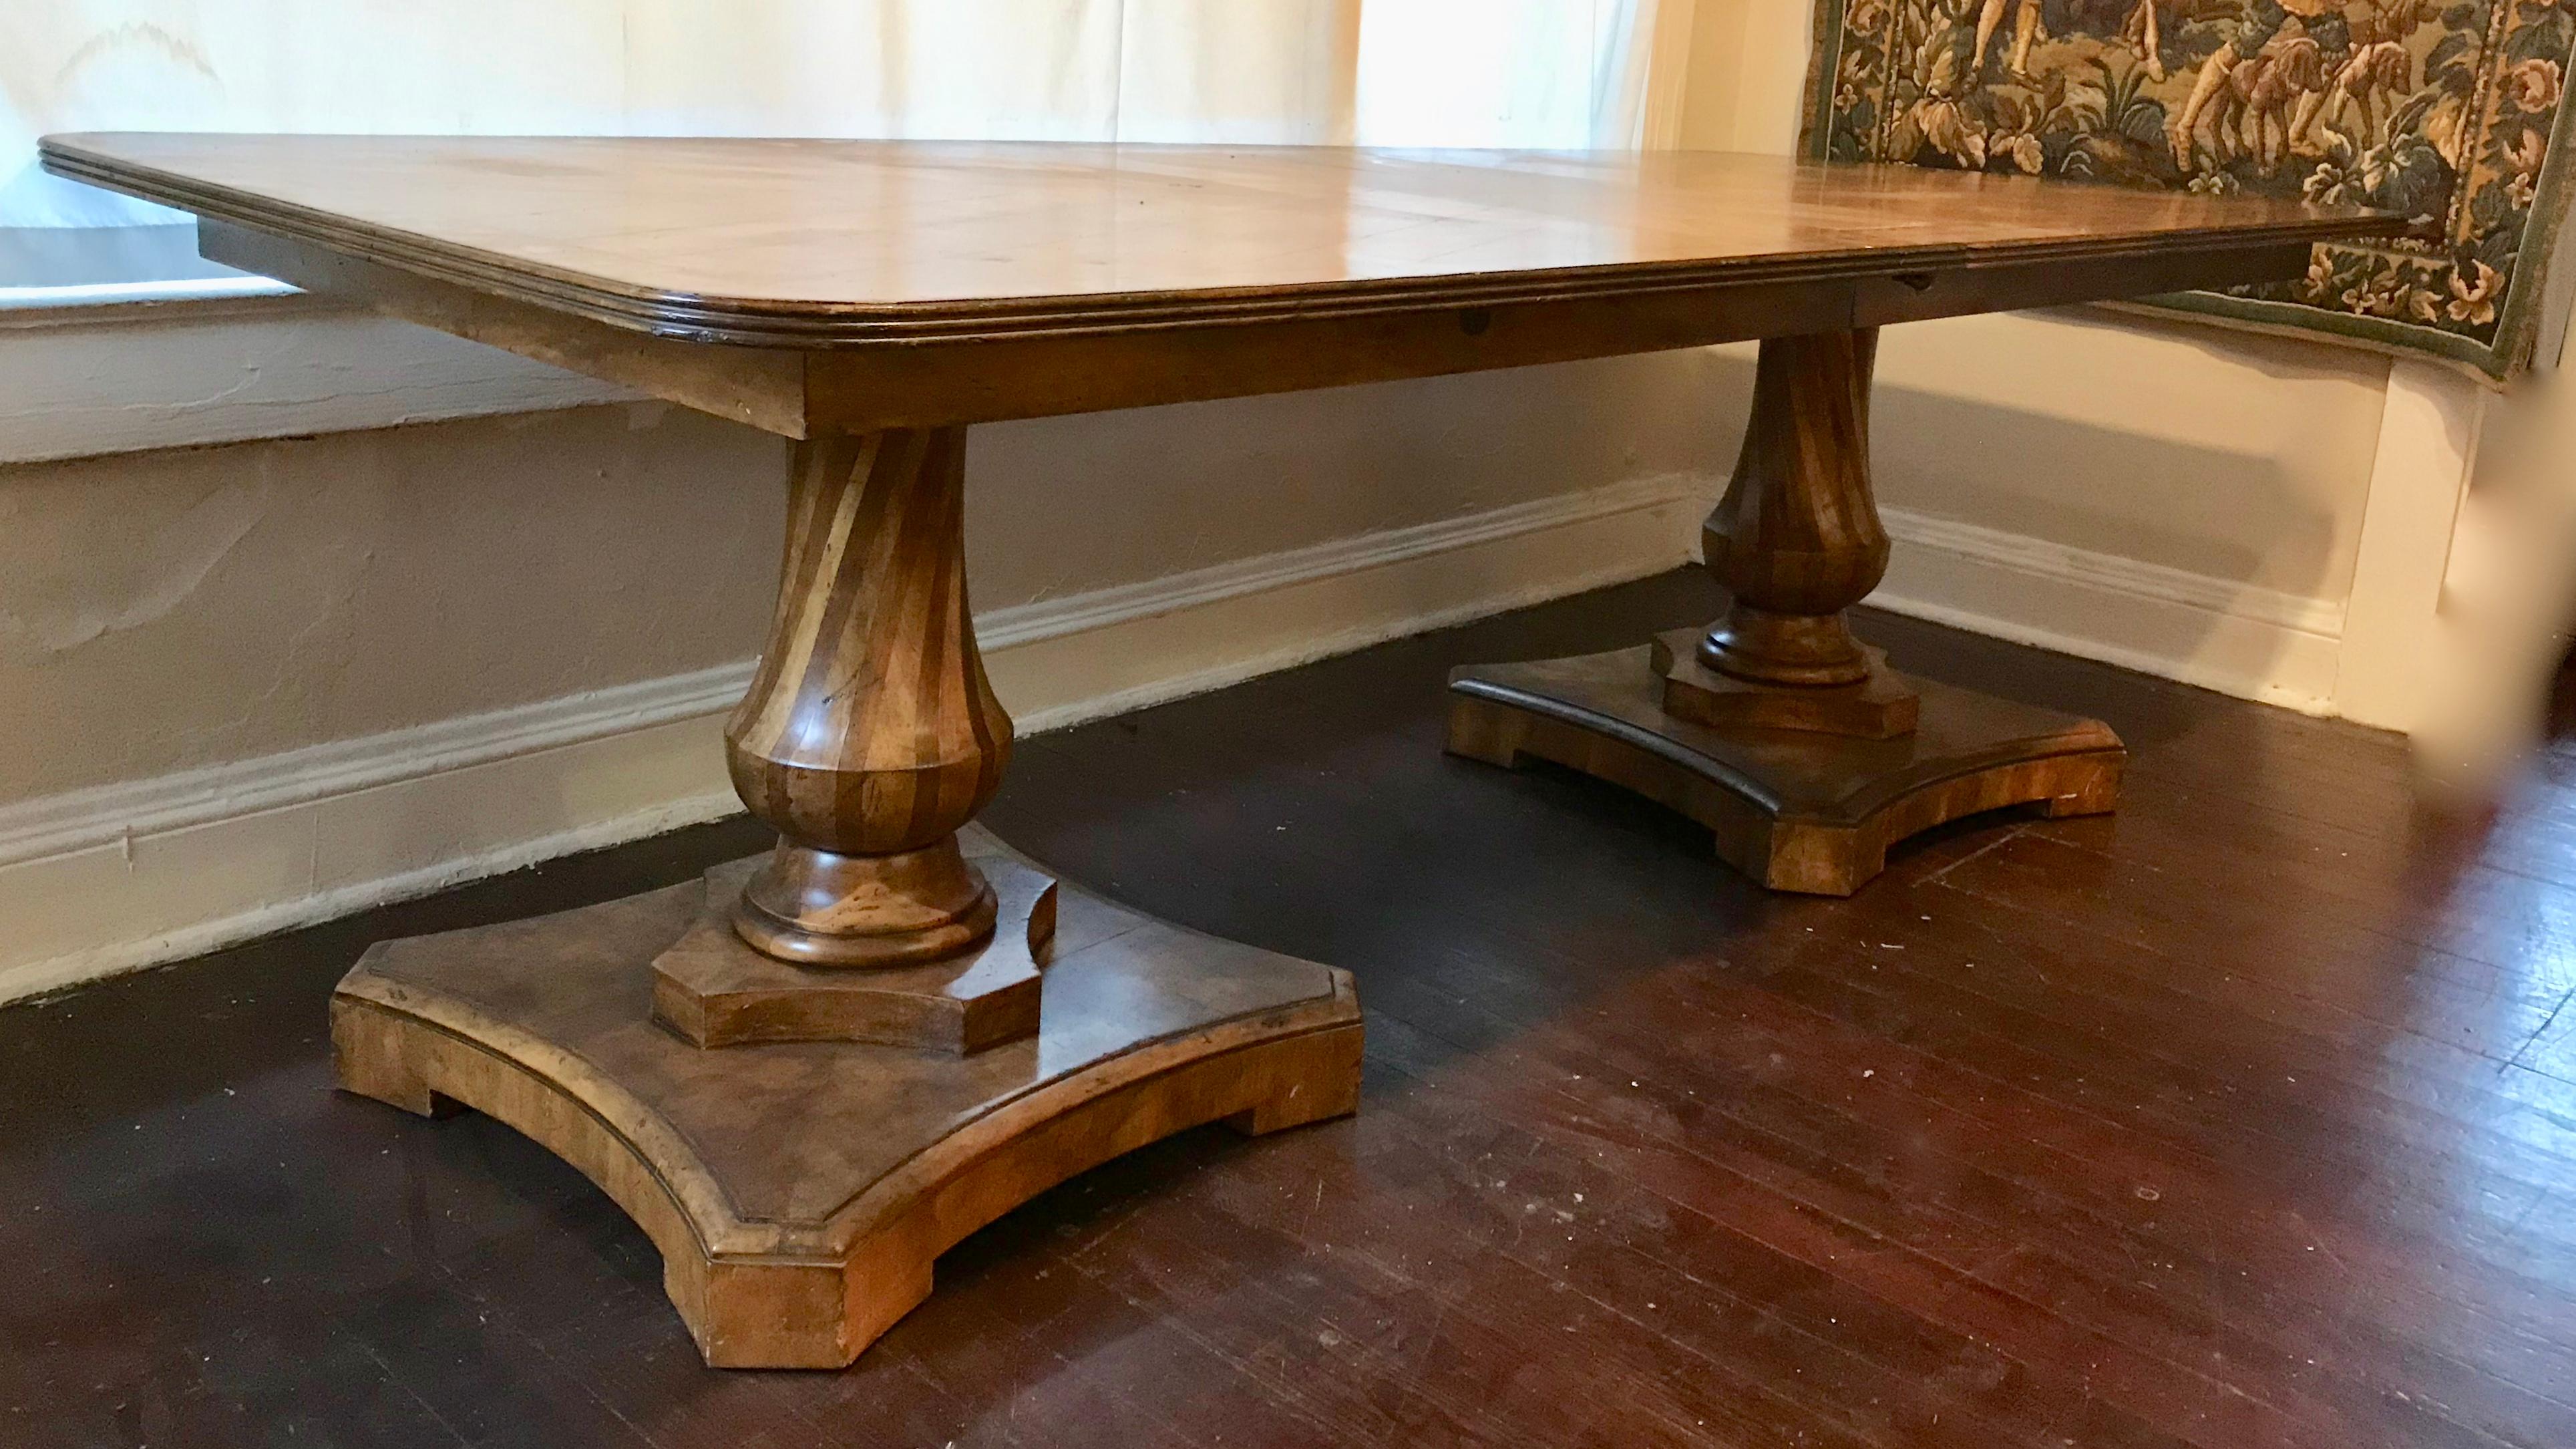 This is an impressive custom dining table from a large Palm Beach residence.
The dining Table is 8ft long with a leaf which is 18 inches, in total is 114 inches long 30 high and 42 wide.
Very heavy quality twin pedestal form, with the top having